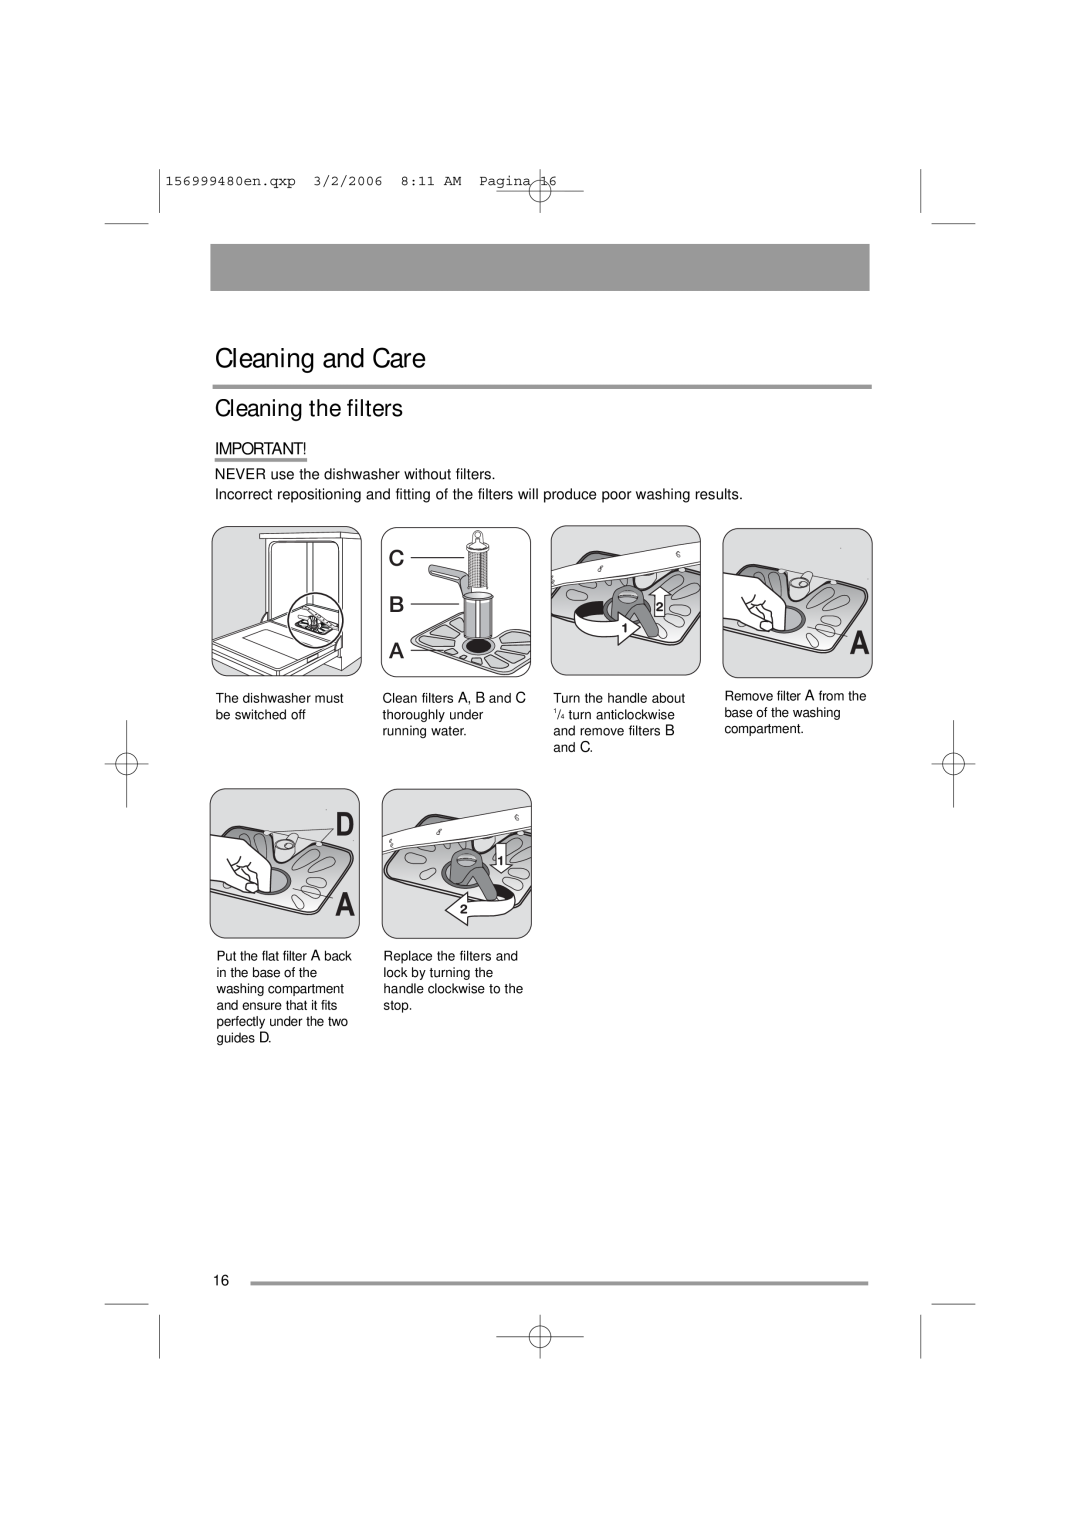 Zanussi ZDF311 user manual Cleaning and Care, Cleaning the filters, 156999480en.qxp 3/2/2006 811 AM Pagina 